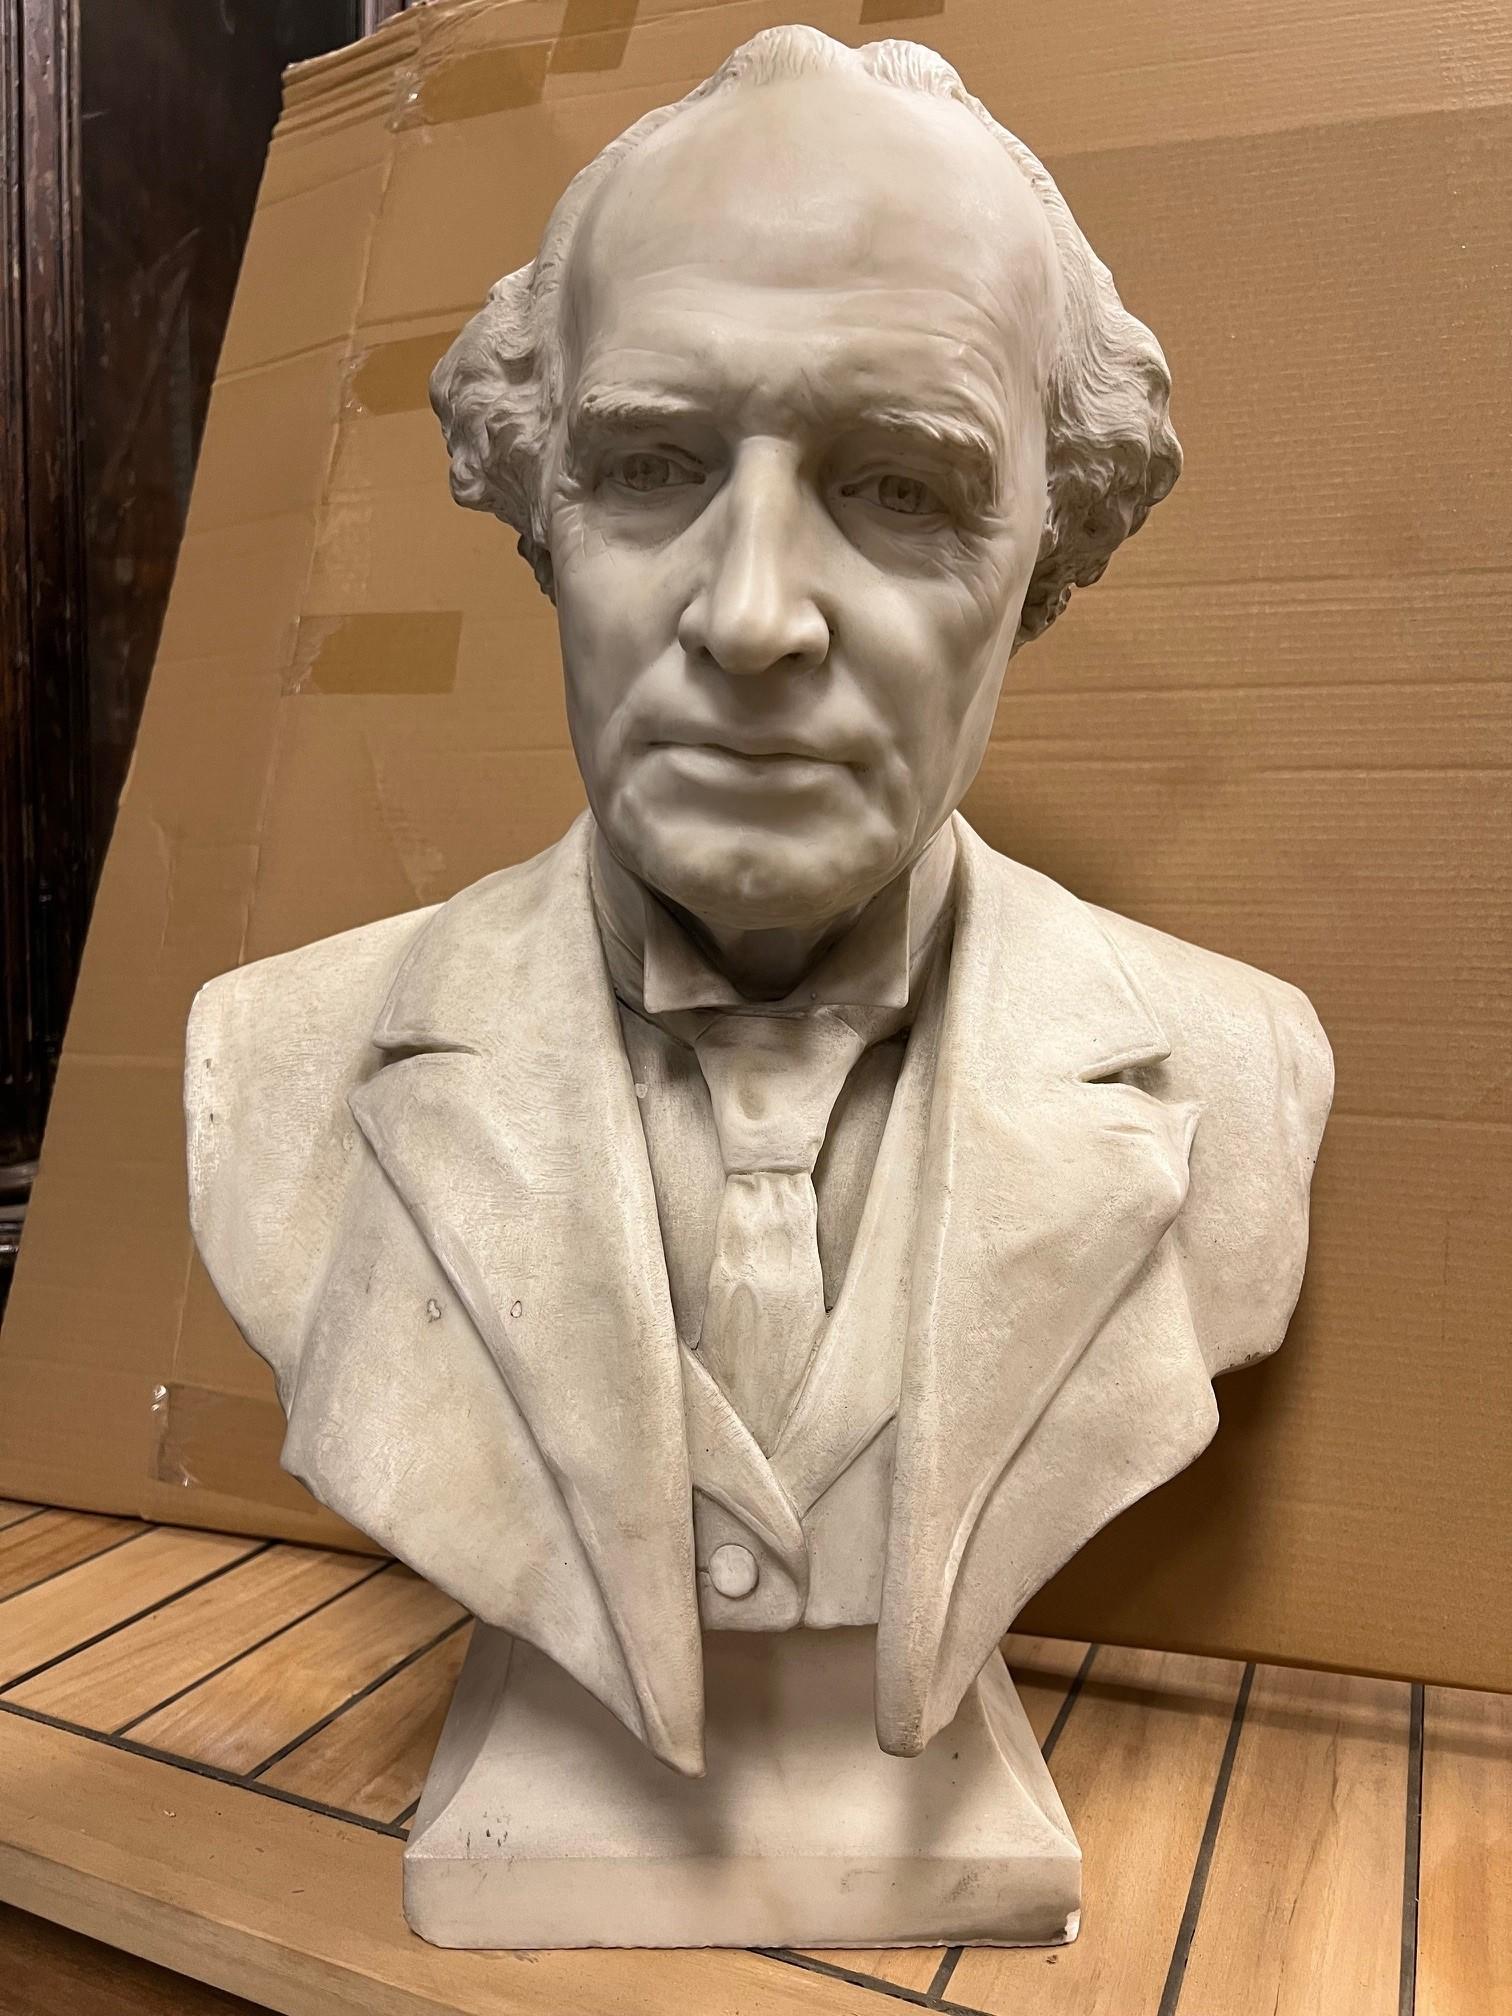 Early 20th century marble bust of a very distinguished gentleman with a jacket, vest and necktie. No signature and not sure who the gentleman is but the carving is very well done. The artist's achieved a realism to the gentlemans face, it's a great